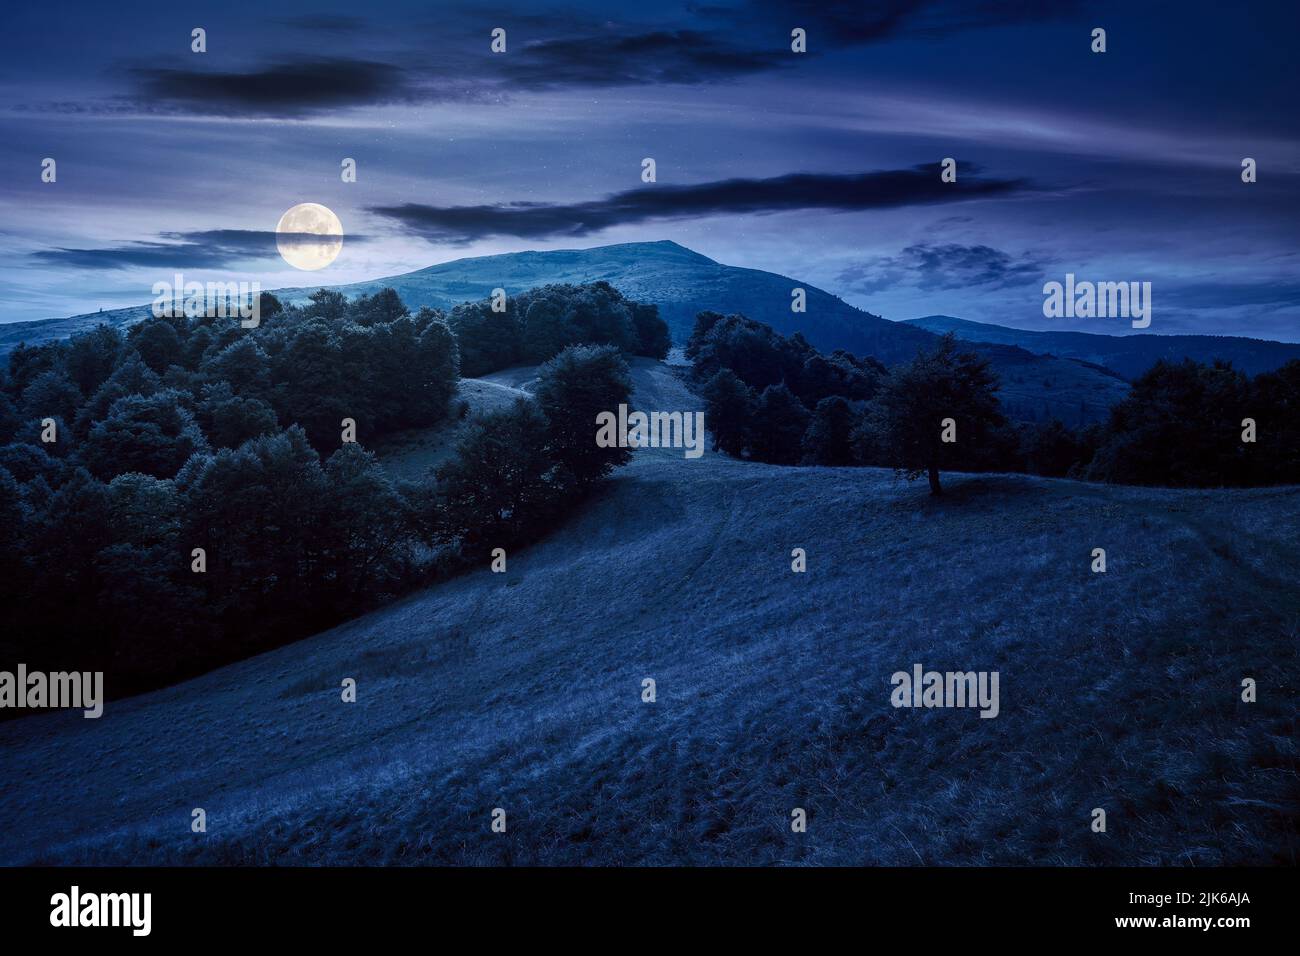 stunning mountain landscape in summer at night. forested hills and grassy meadows in full moon light. view in to the distant valley and ridge beneath Stock Photo